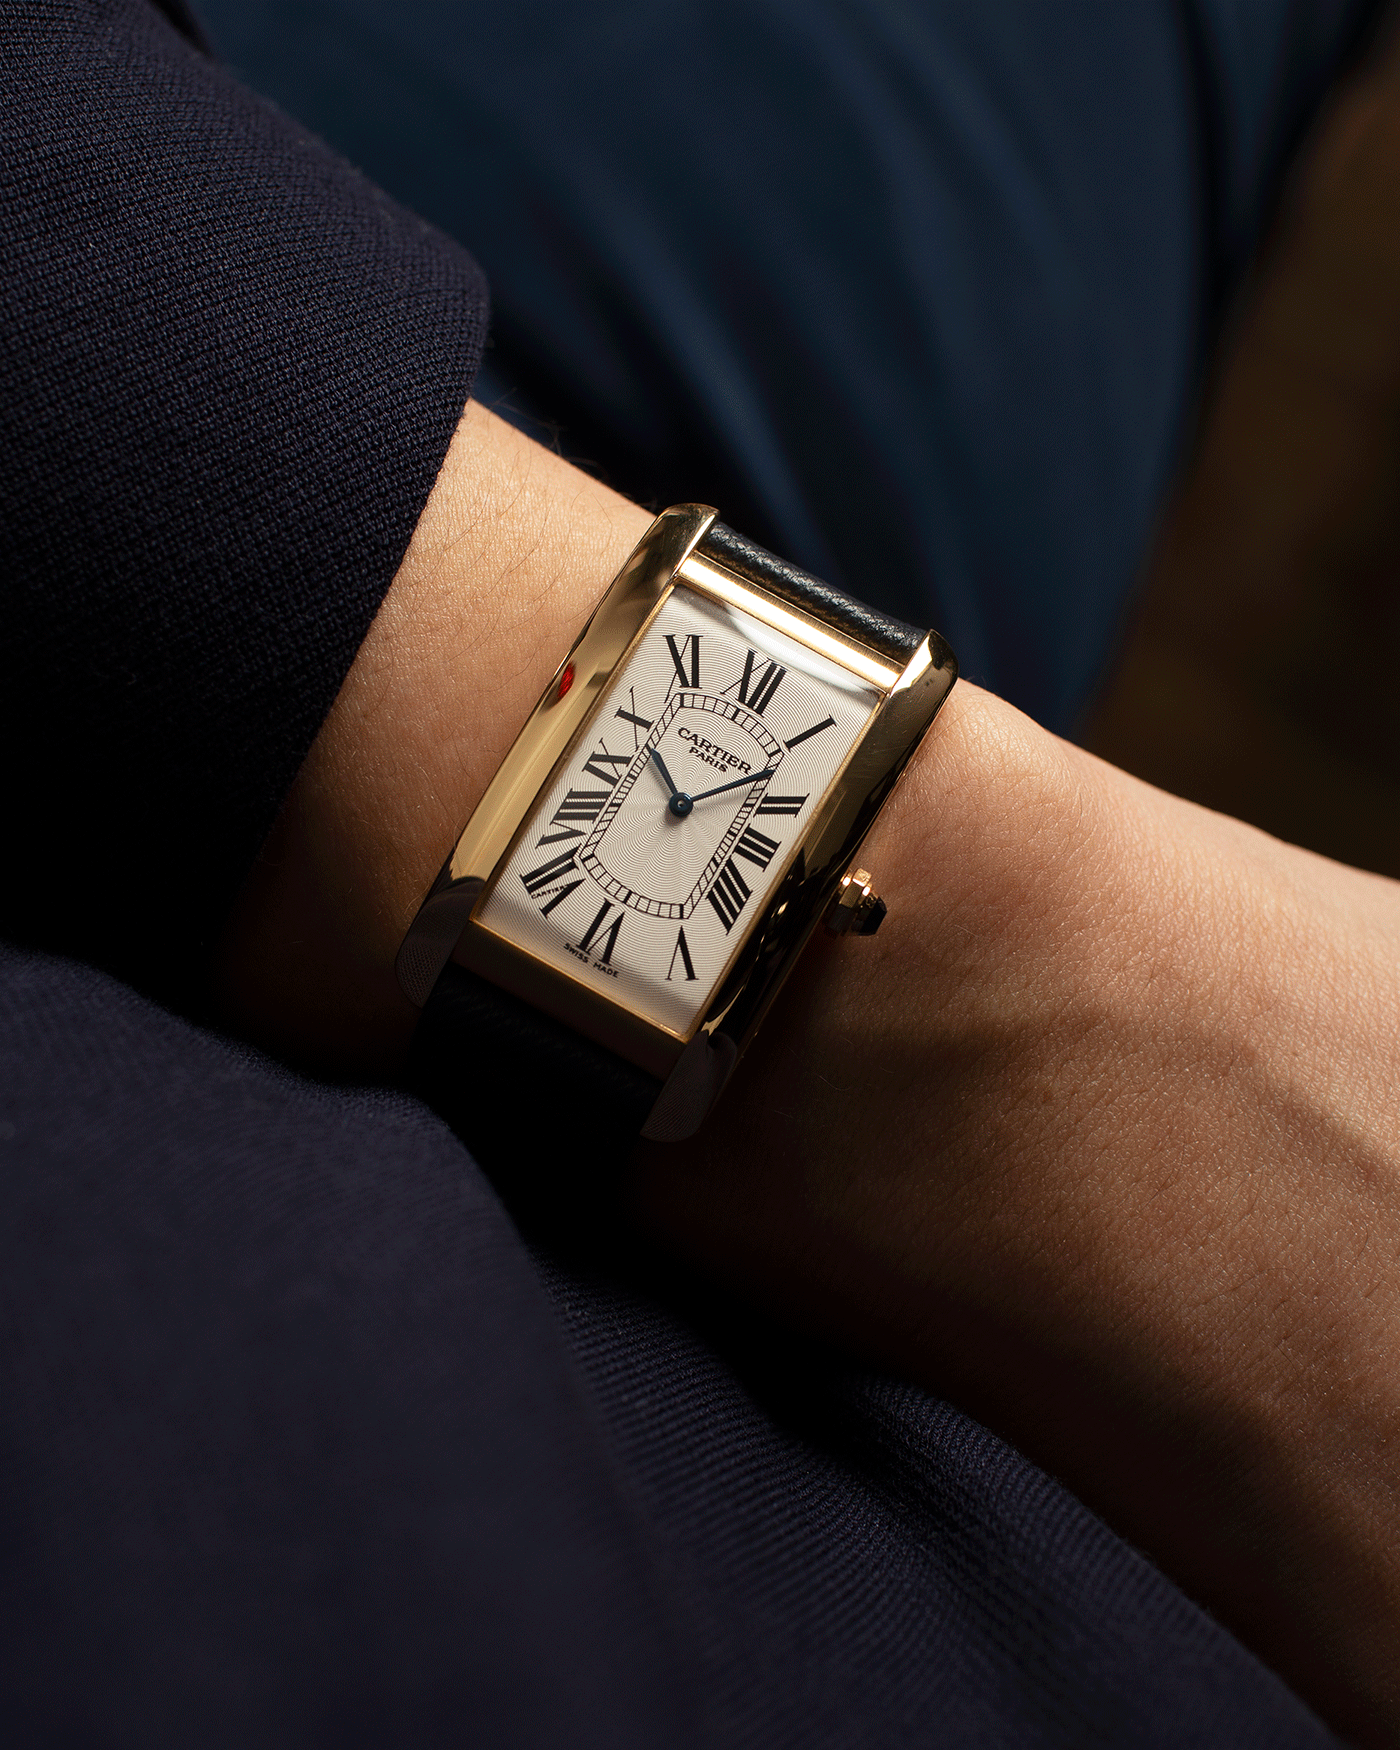 SOLD*Cartier Tank Americaine ref# 1735